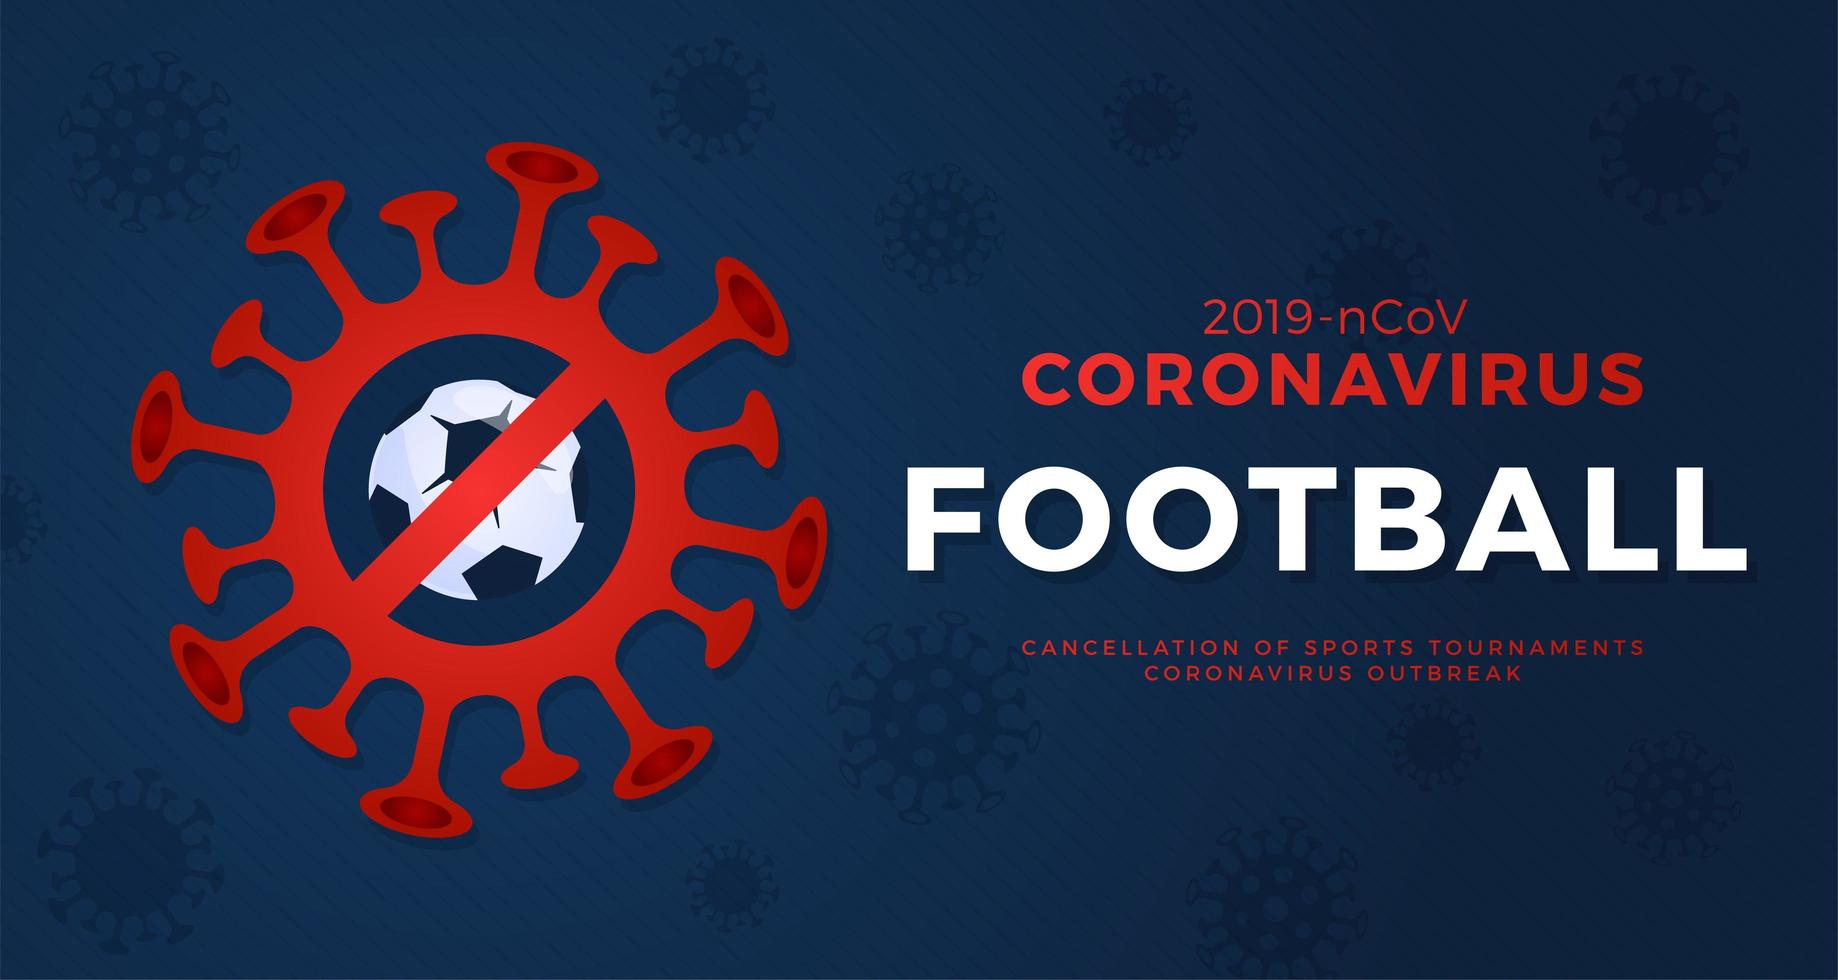 Football vector banner caution coronavirus. Stop 2019-nCoV outbreak. Coronavirus danger and public health risk disease and flu outbreak. Cancellation of sporting events and matches concept